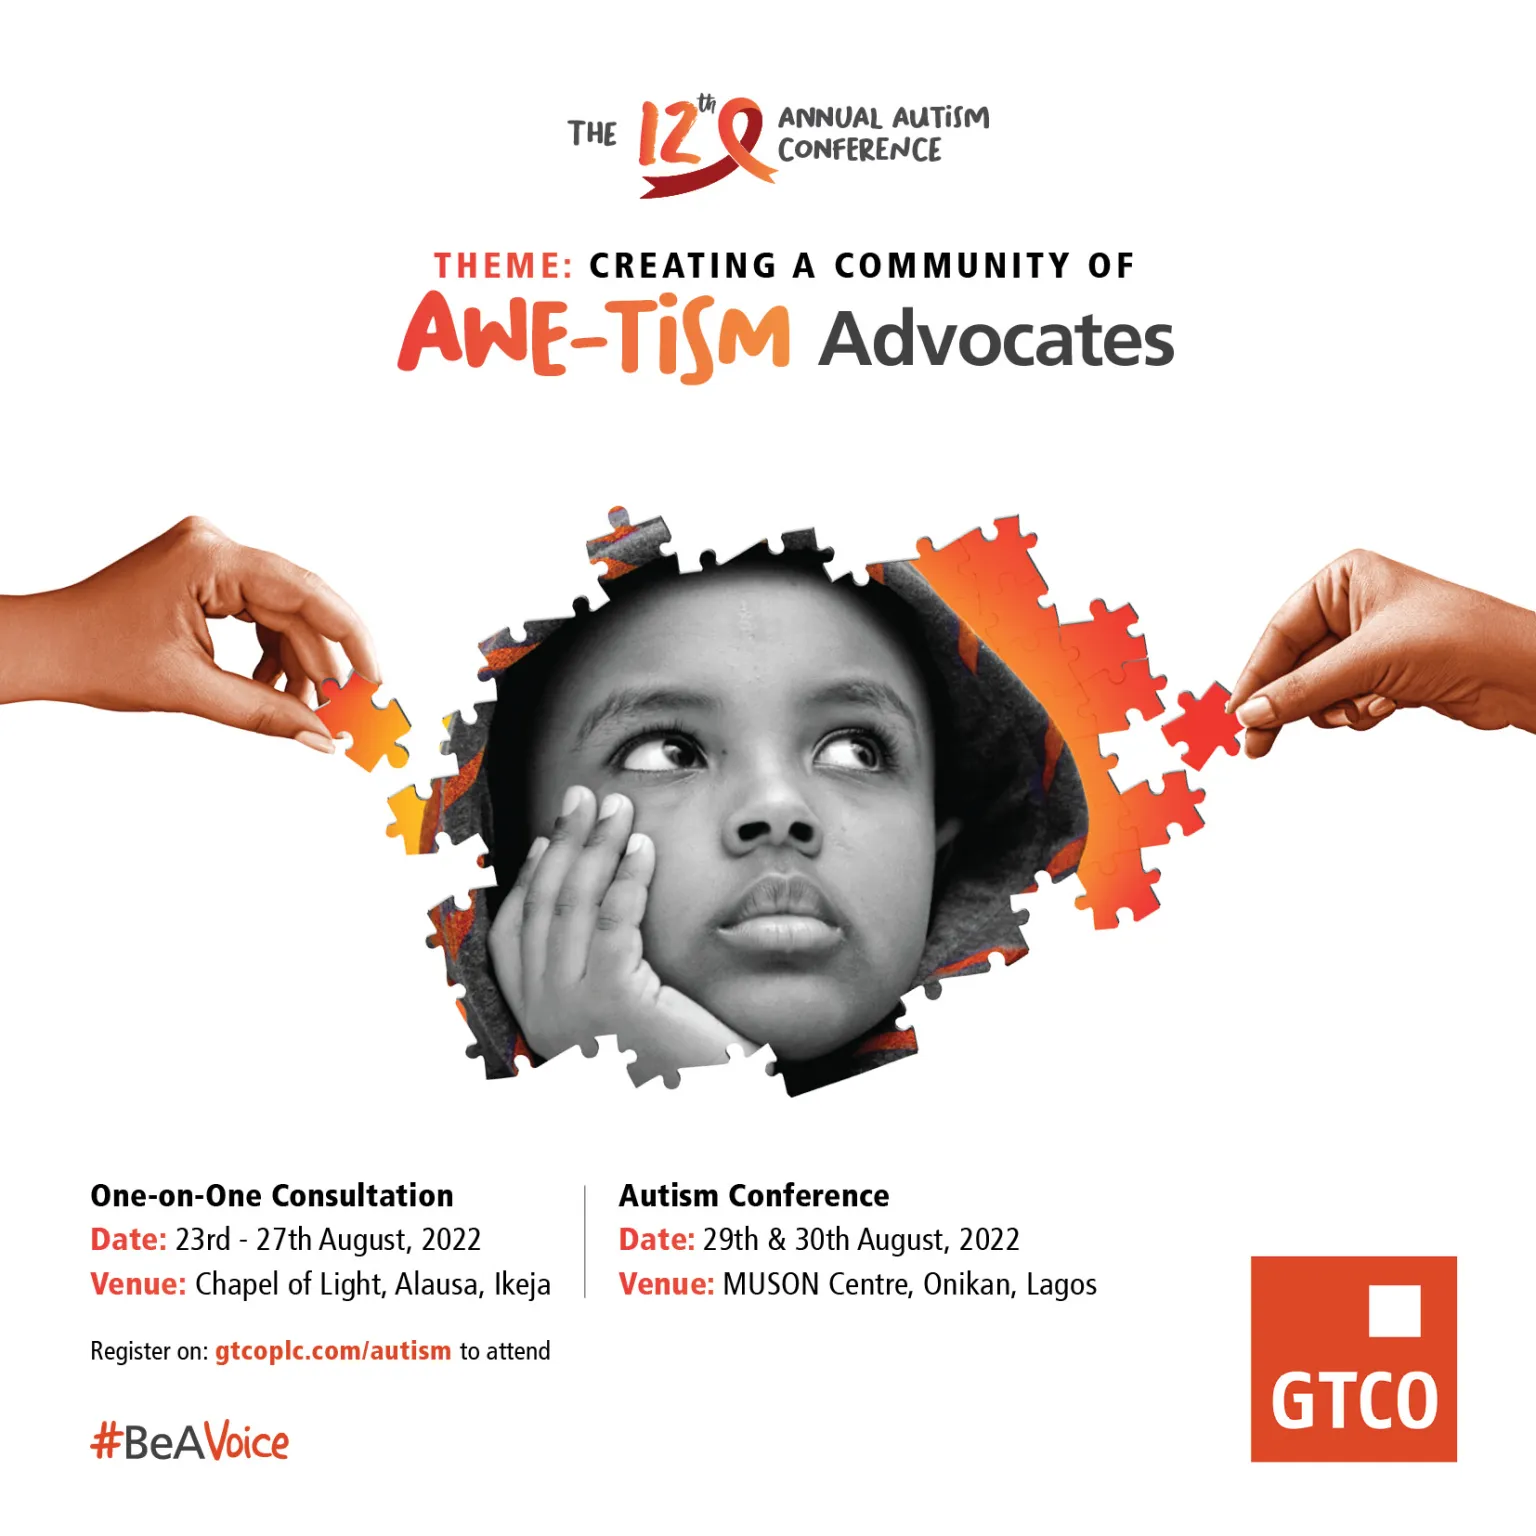 GTCO Autism conference holds August 29th – 30th in Lagos